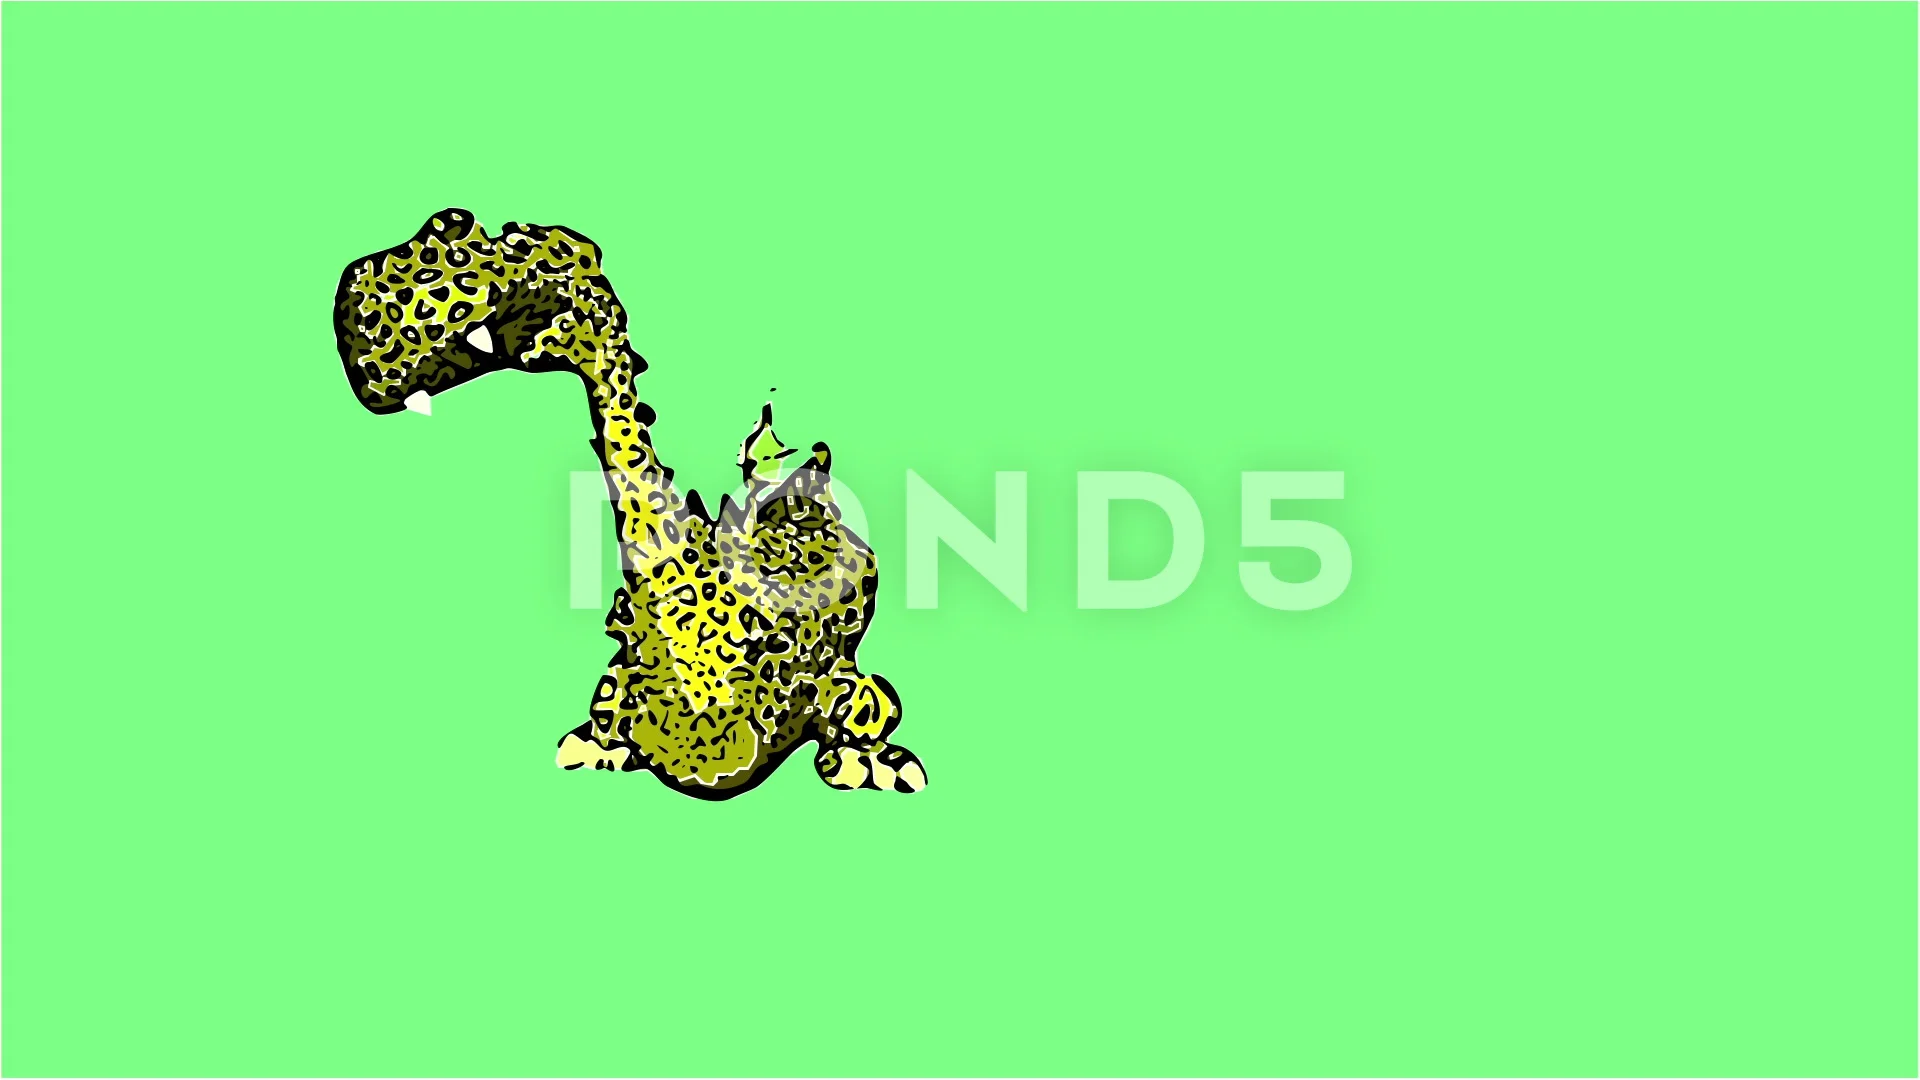 Cute Dragon Animation Stock Footage ~ Royalty Free Stock Videos | Pond5